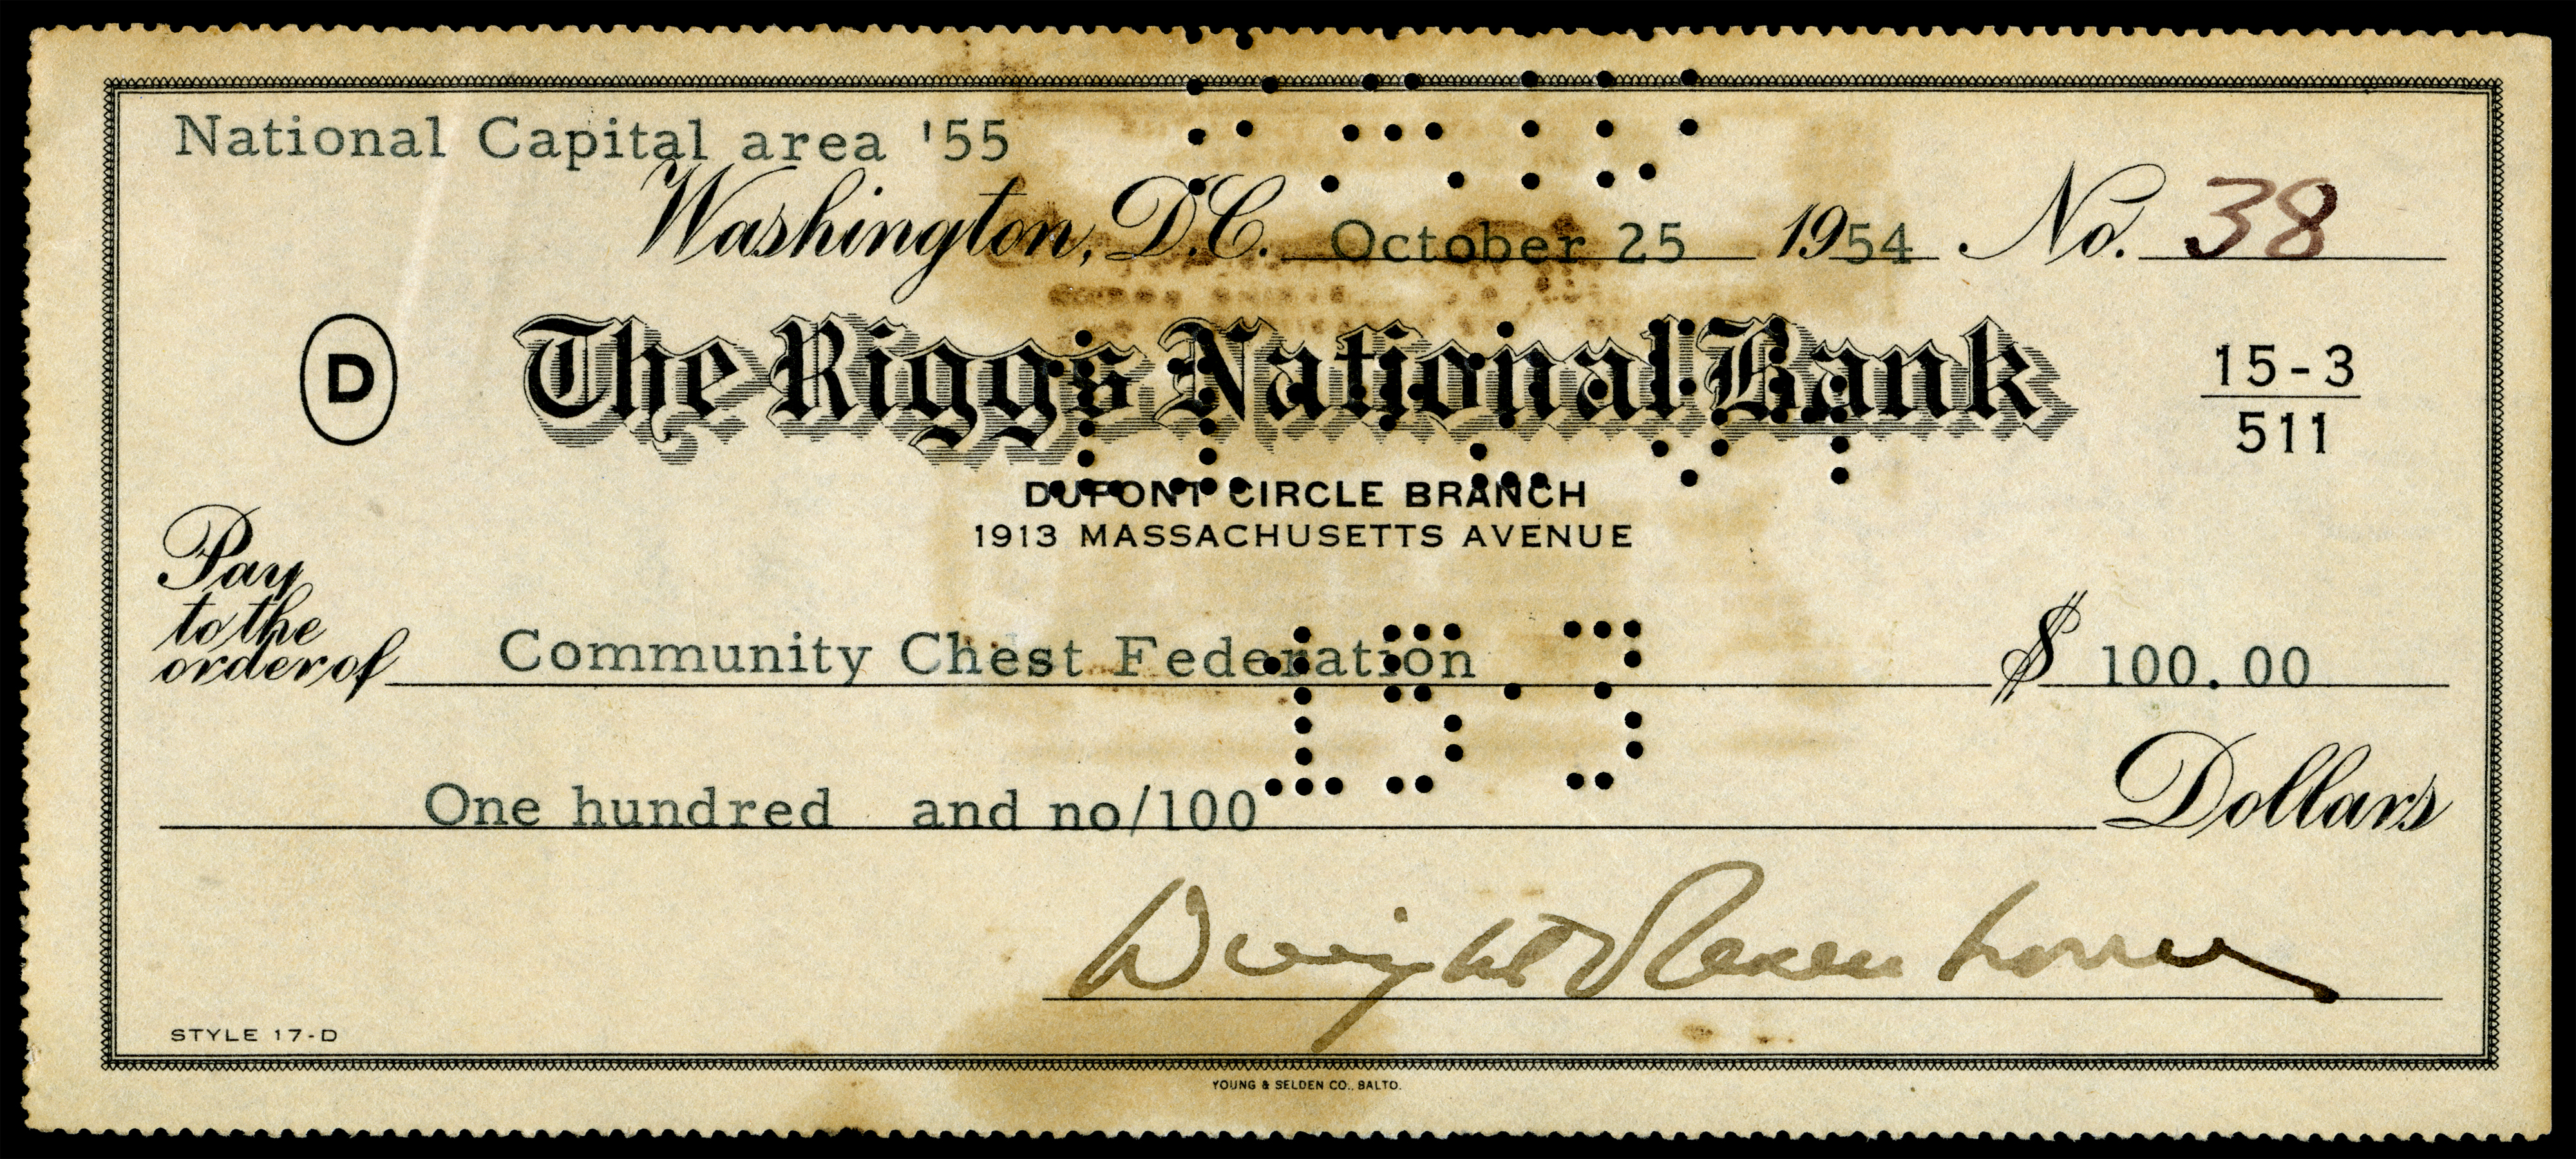 EISENHOWER, Dwight (signed check)